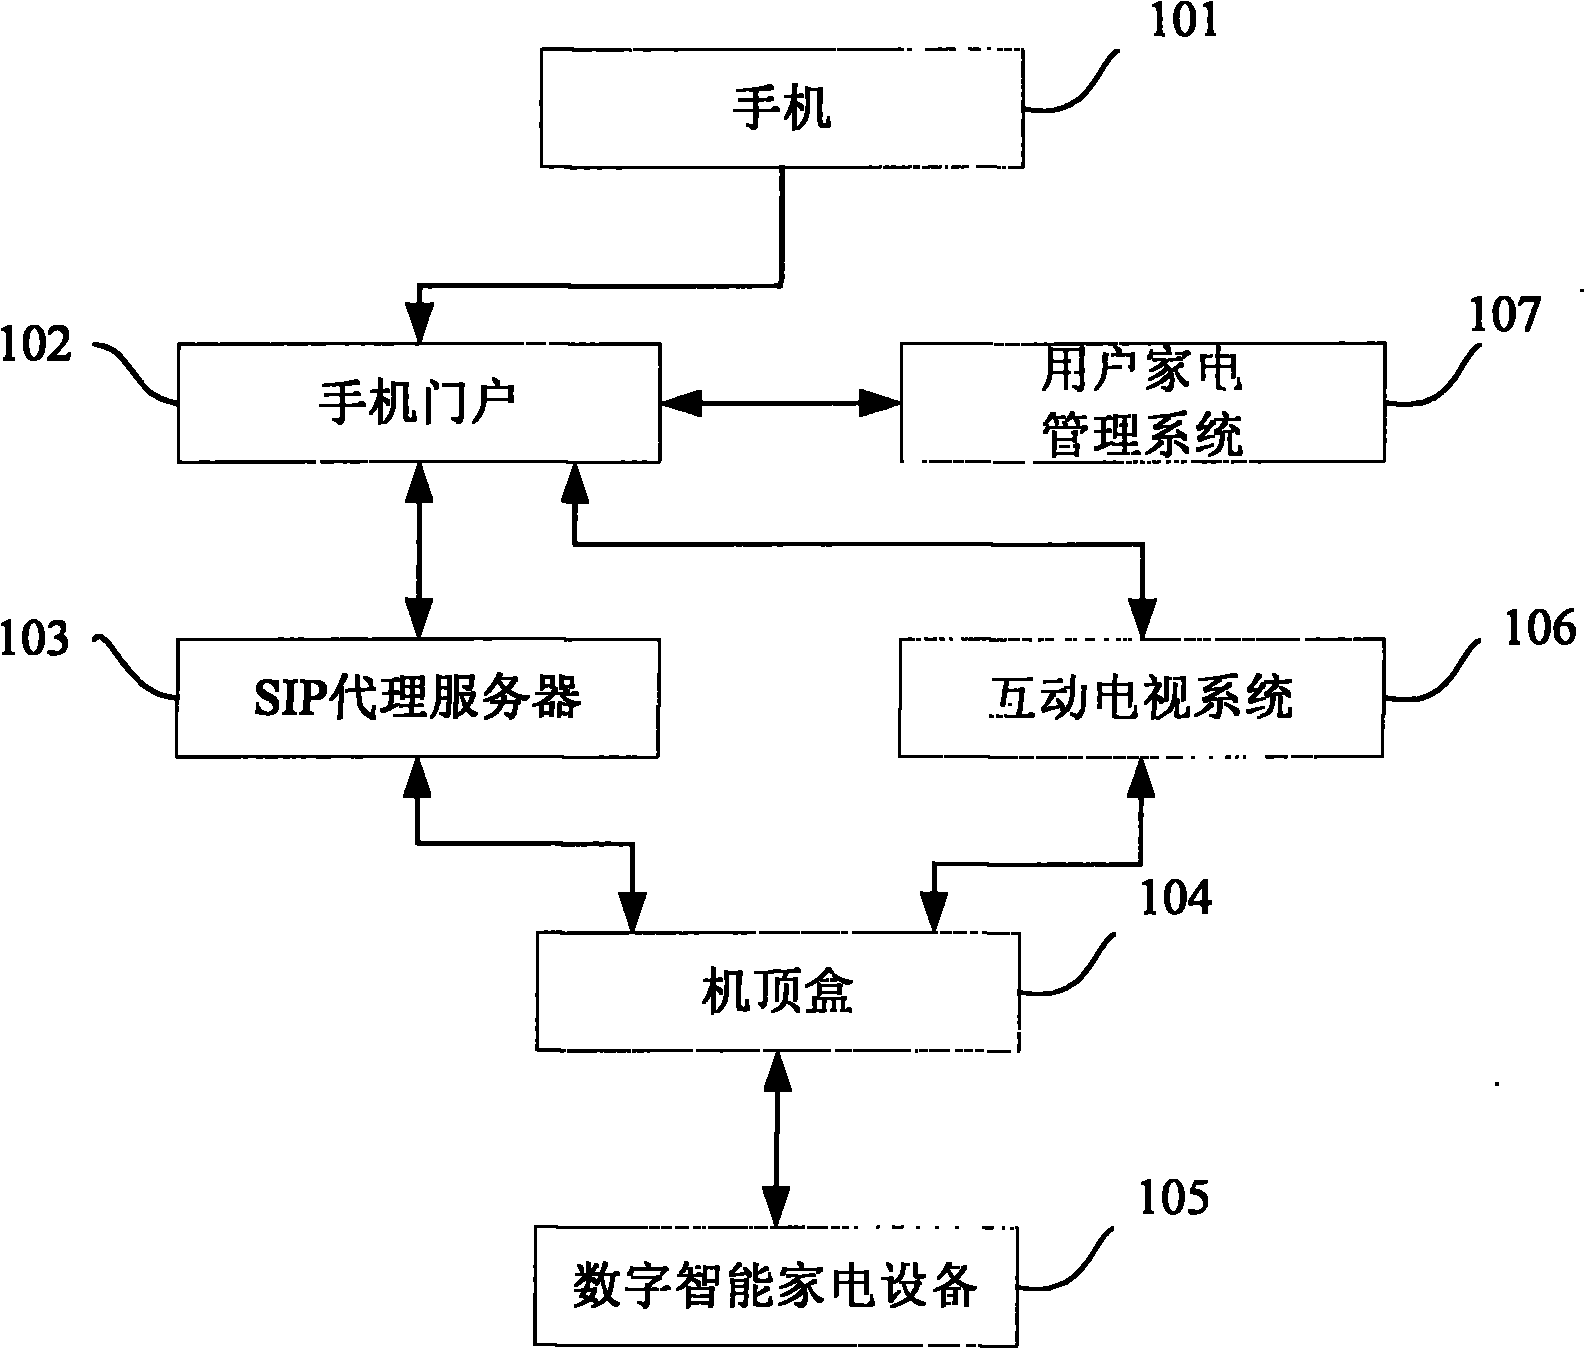 Digital and intelligent remote control system and method for household electrical appliances on basis of interactive TV application